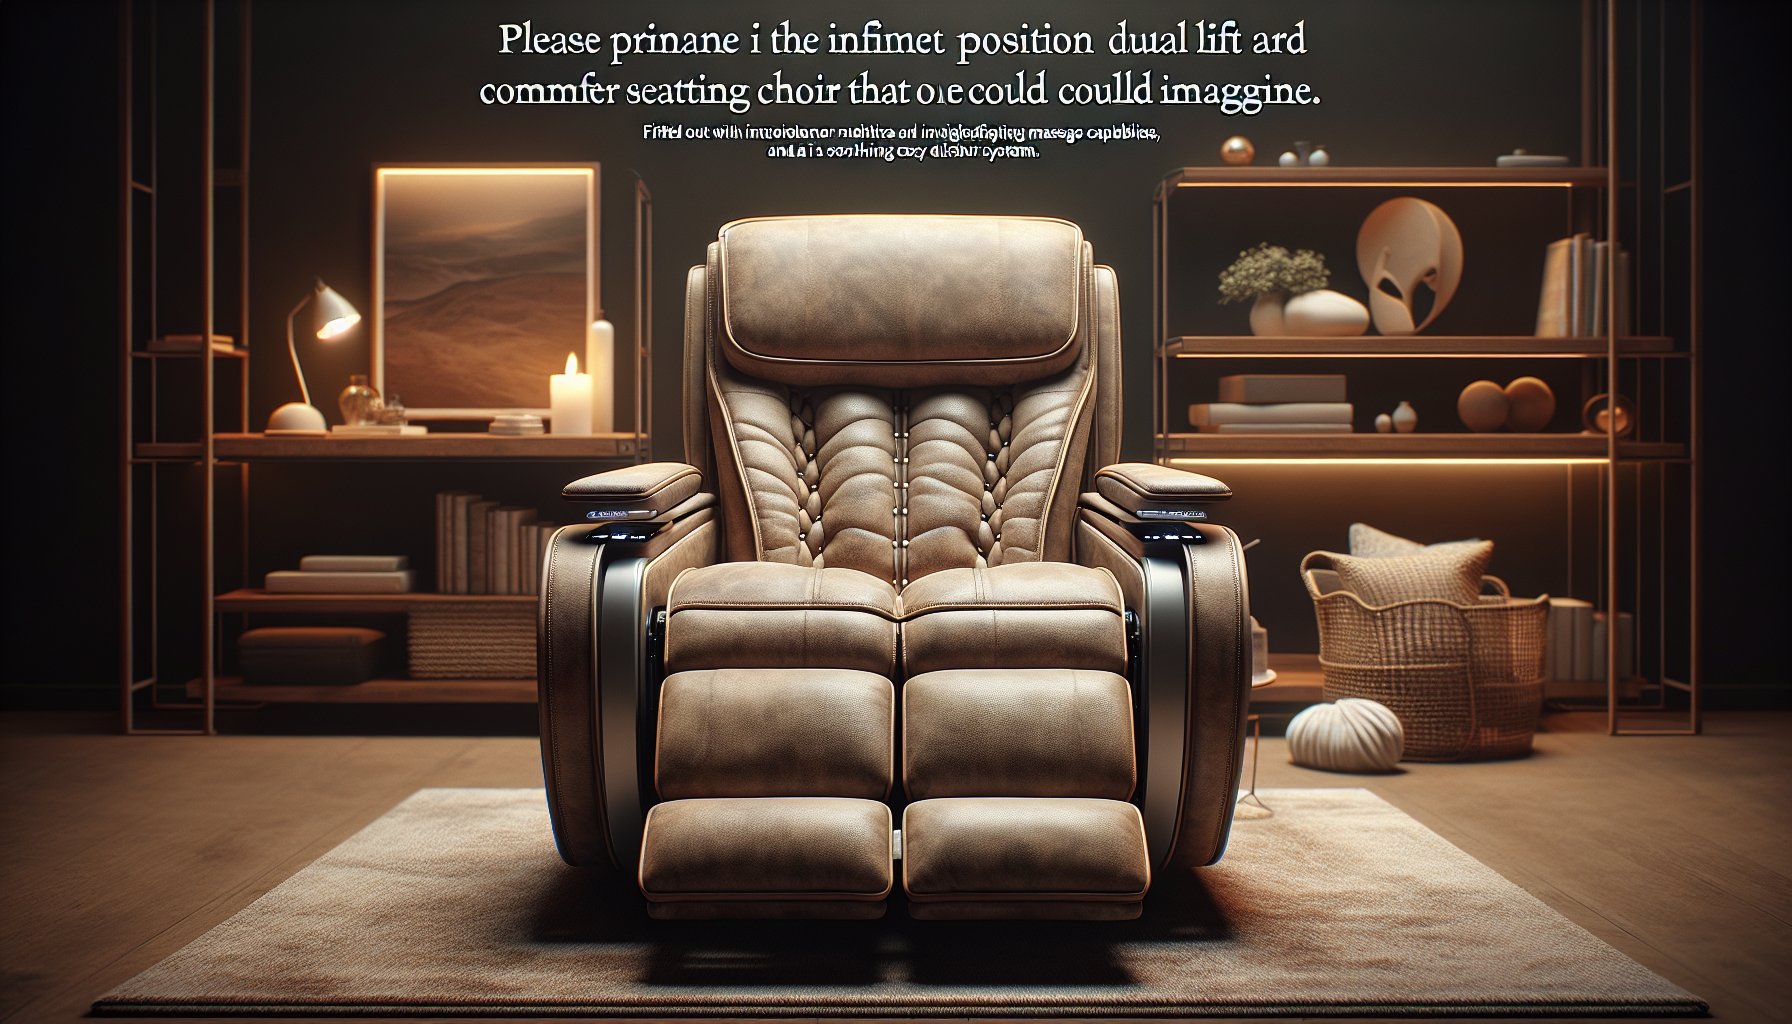 For Ultimate Comfort: The Infinite Position Dual Motor Lift Recliner with Massage, Heat, and Stylish Rivet Design